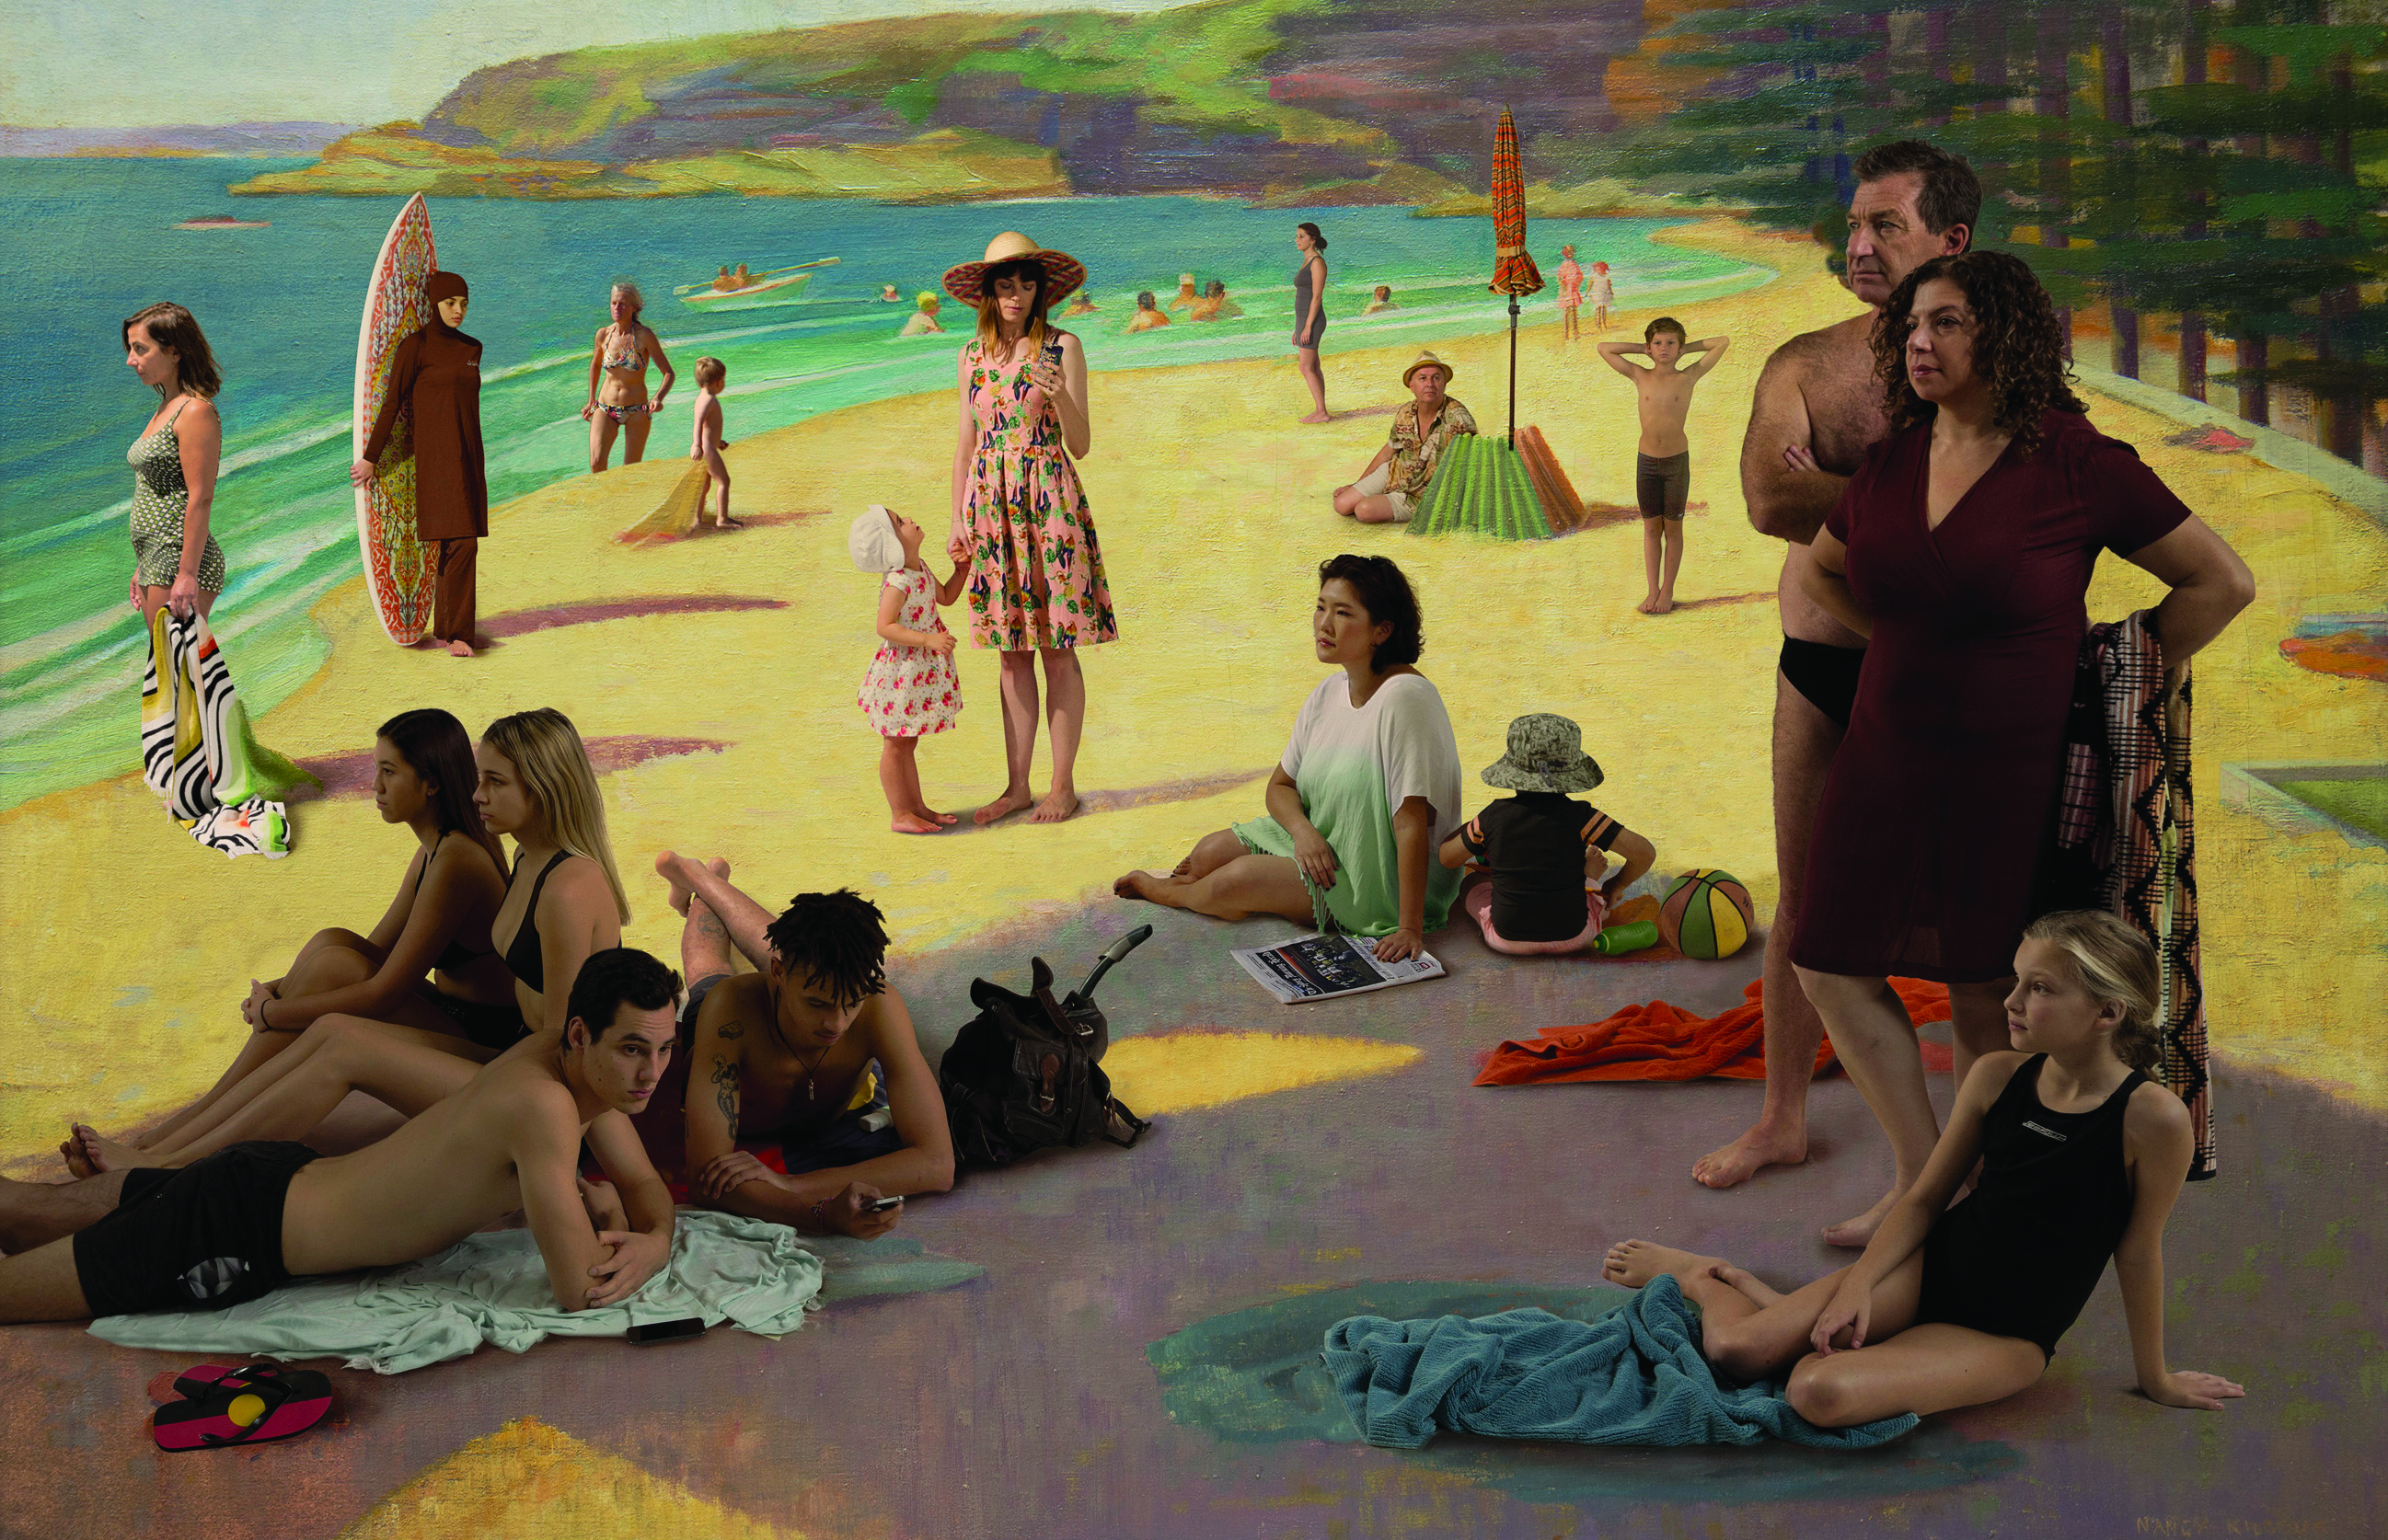 3._Anne_Zahalka_Figures_on_Manly_Beach_April_25_after_Nancy_Kilgour_2015_unique_photo_media_print_115_x_177.5cm_MAGM_Collection_-_donated_by_MAGM_Society_2015.jpg